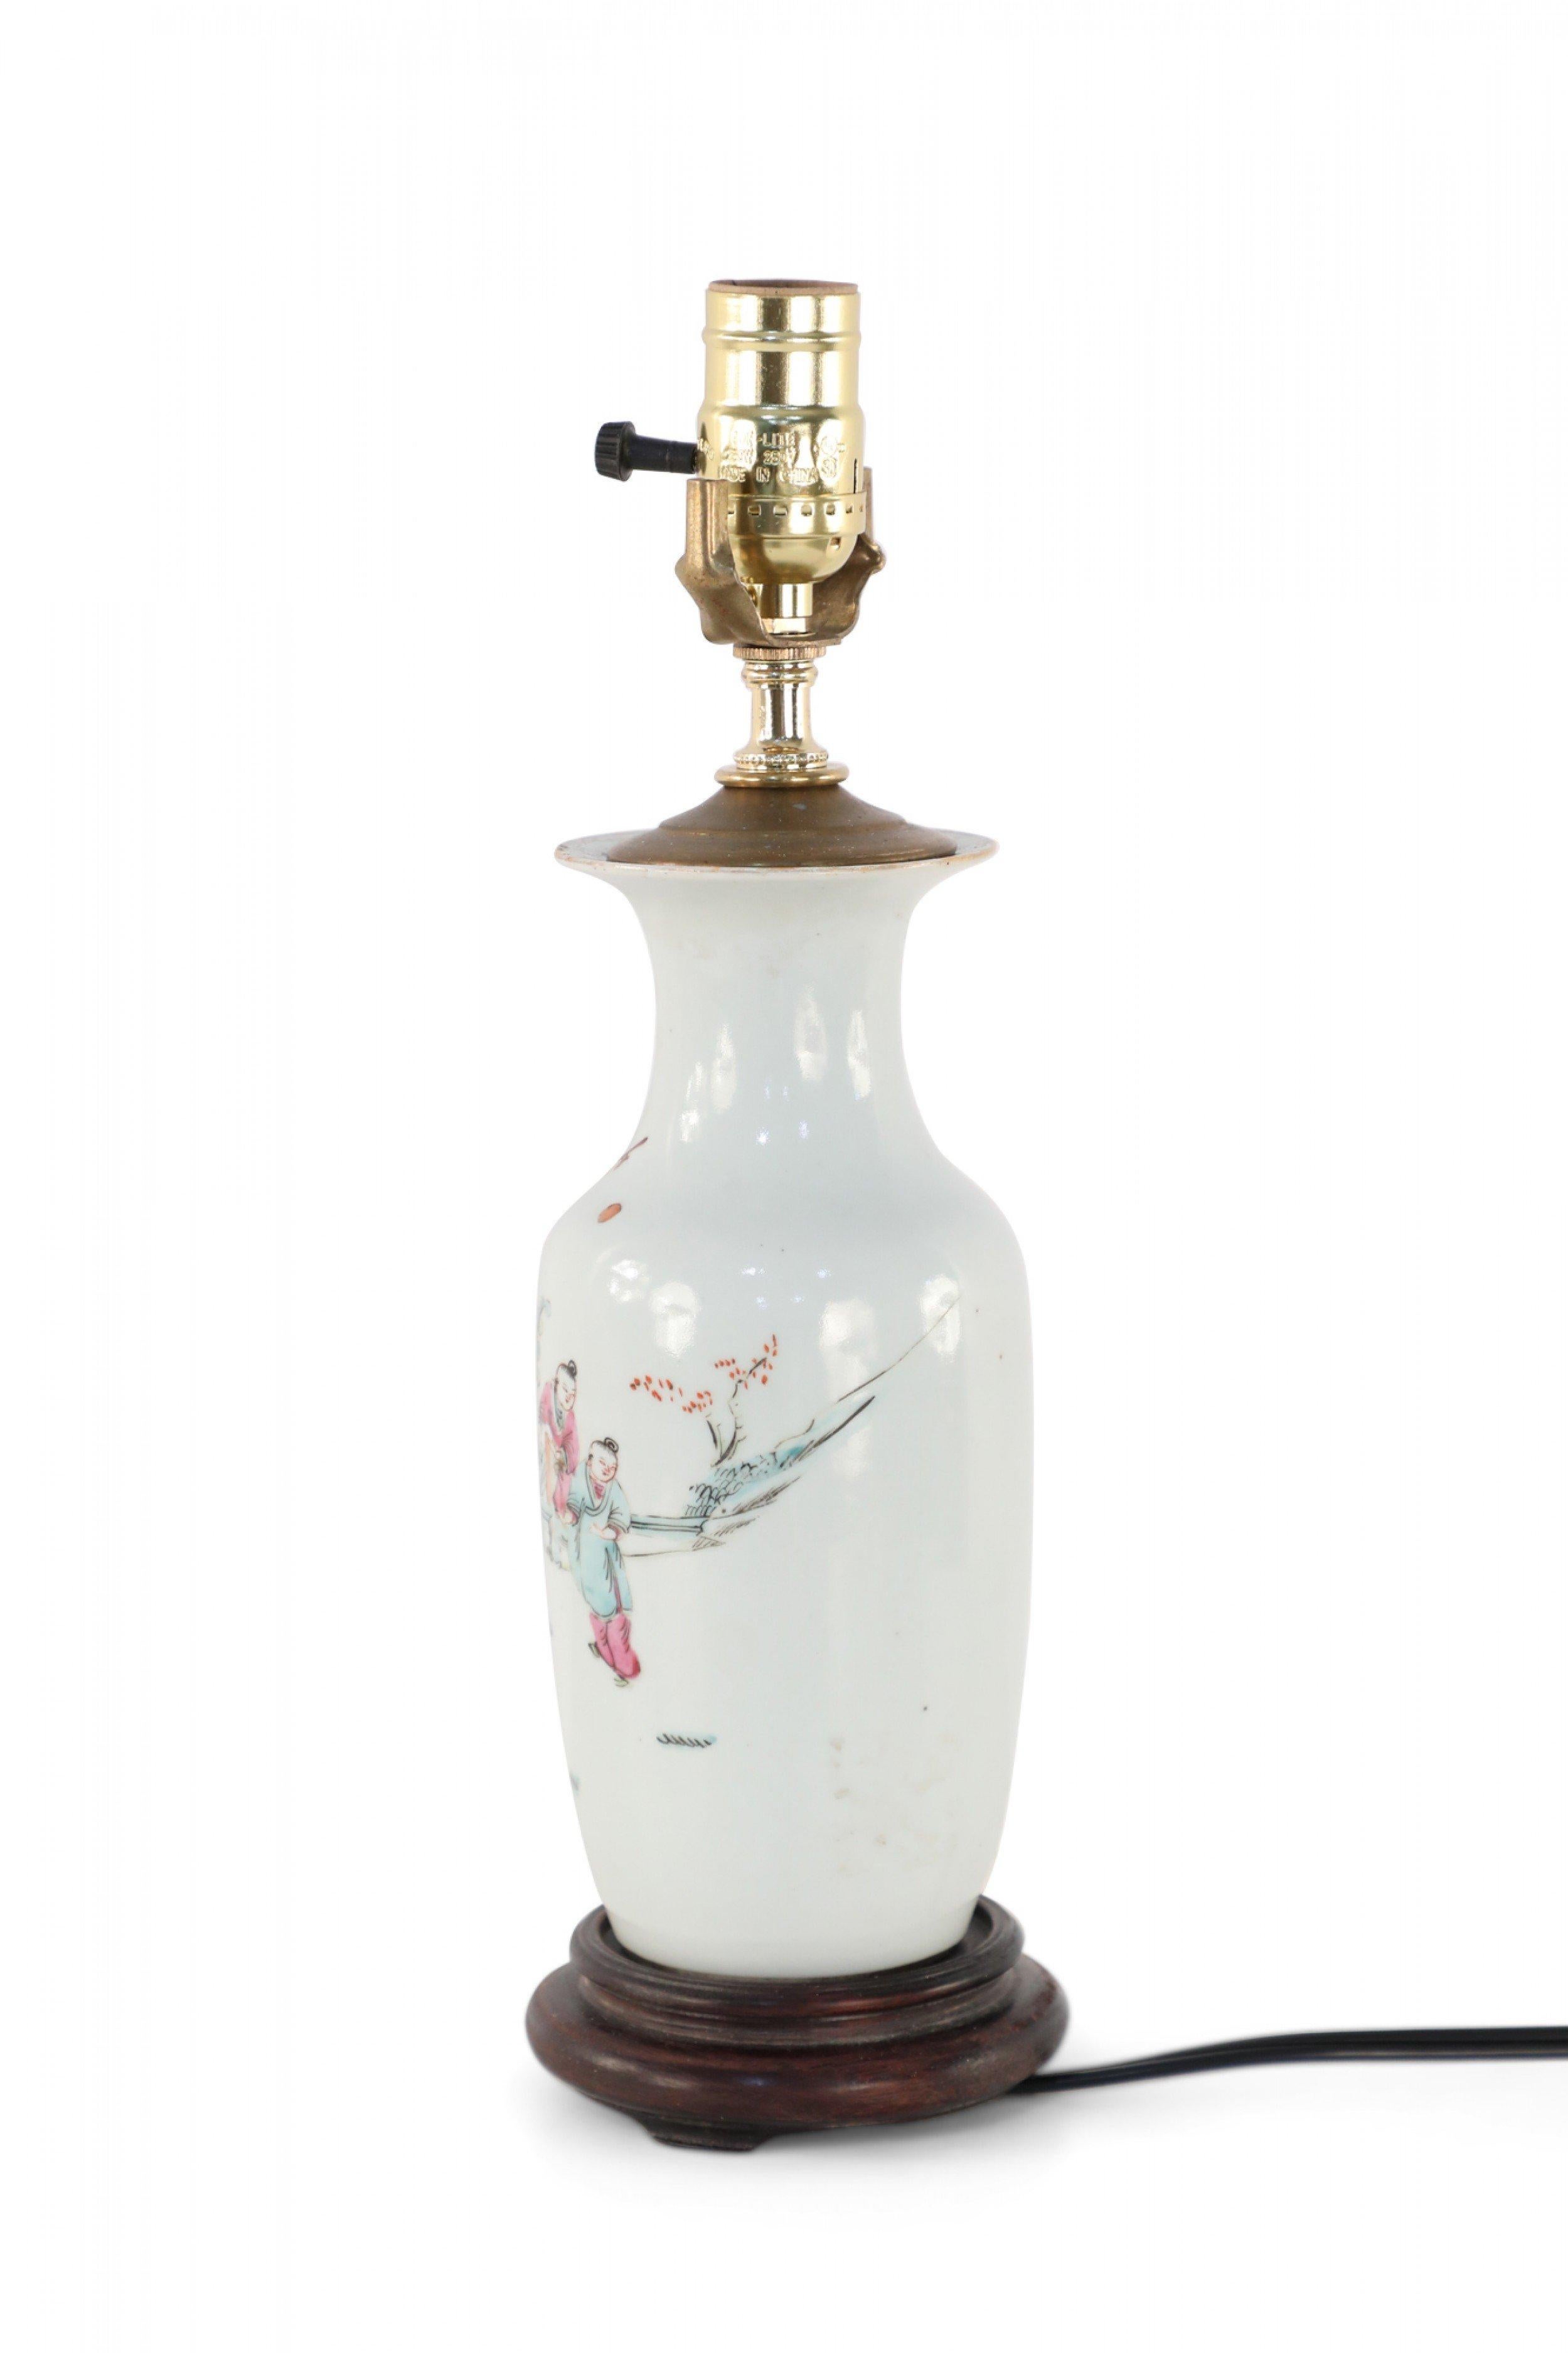 Antique Chinese (Early 20th Century) table lamp made from a white porcelain urn painted with a scene of children playing in orange, pink, and red, mounted on a brown wooden base and fitted with brass hardware.
 